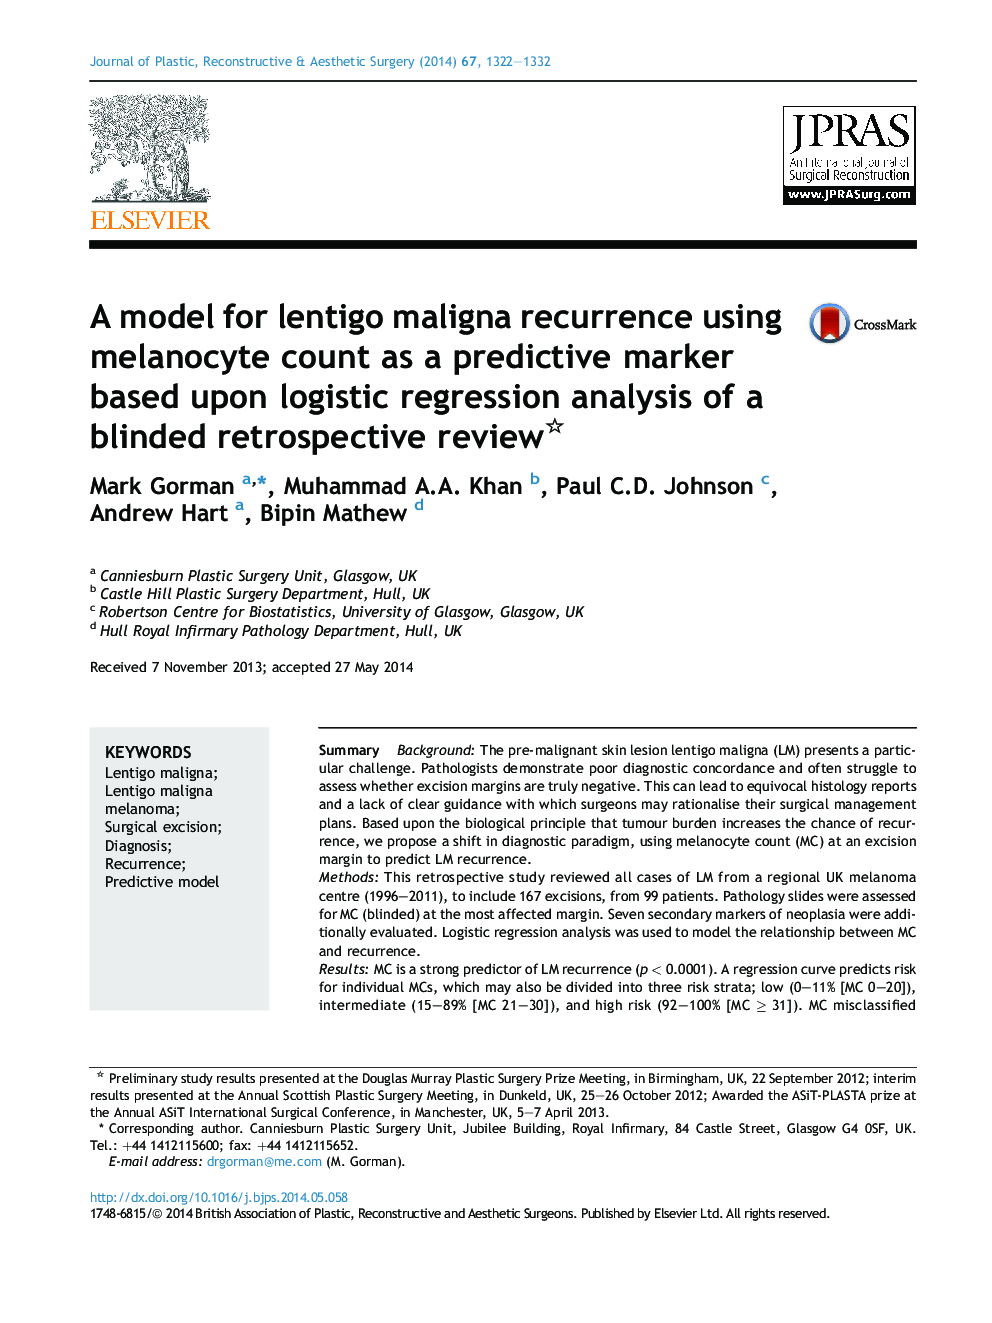 A model for lentigo maligna recurrence using melanocyte count as a predictive marker based upon logistic regression analysis of a blinded retrospective review